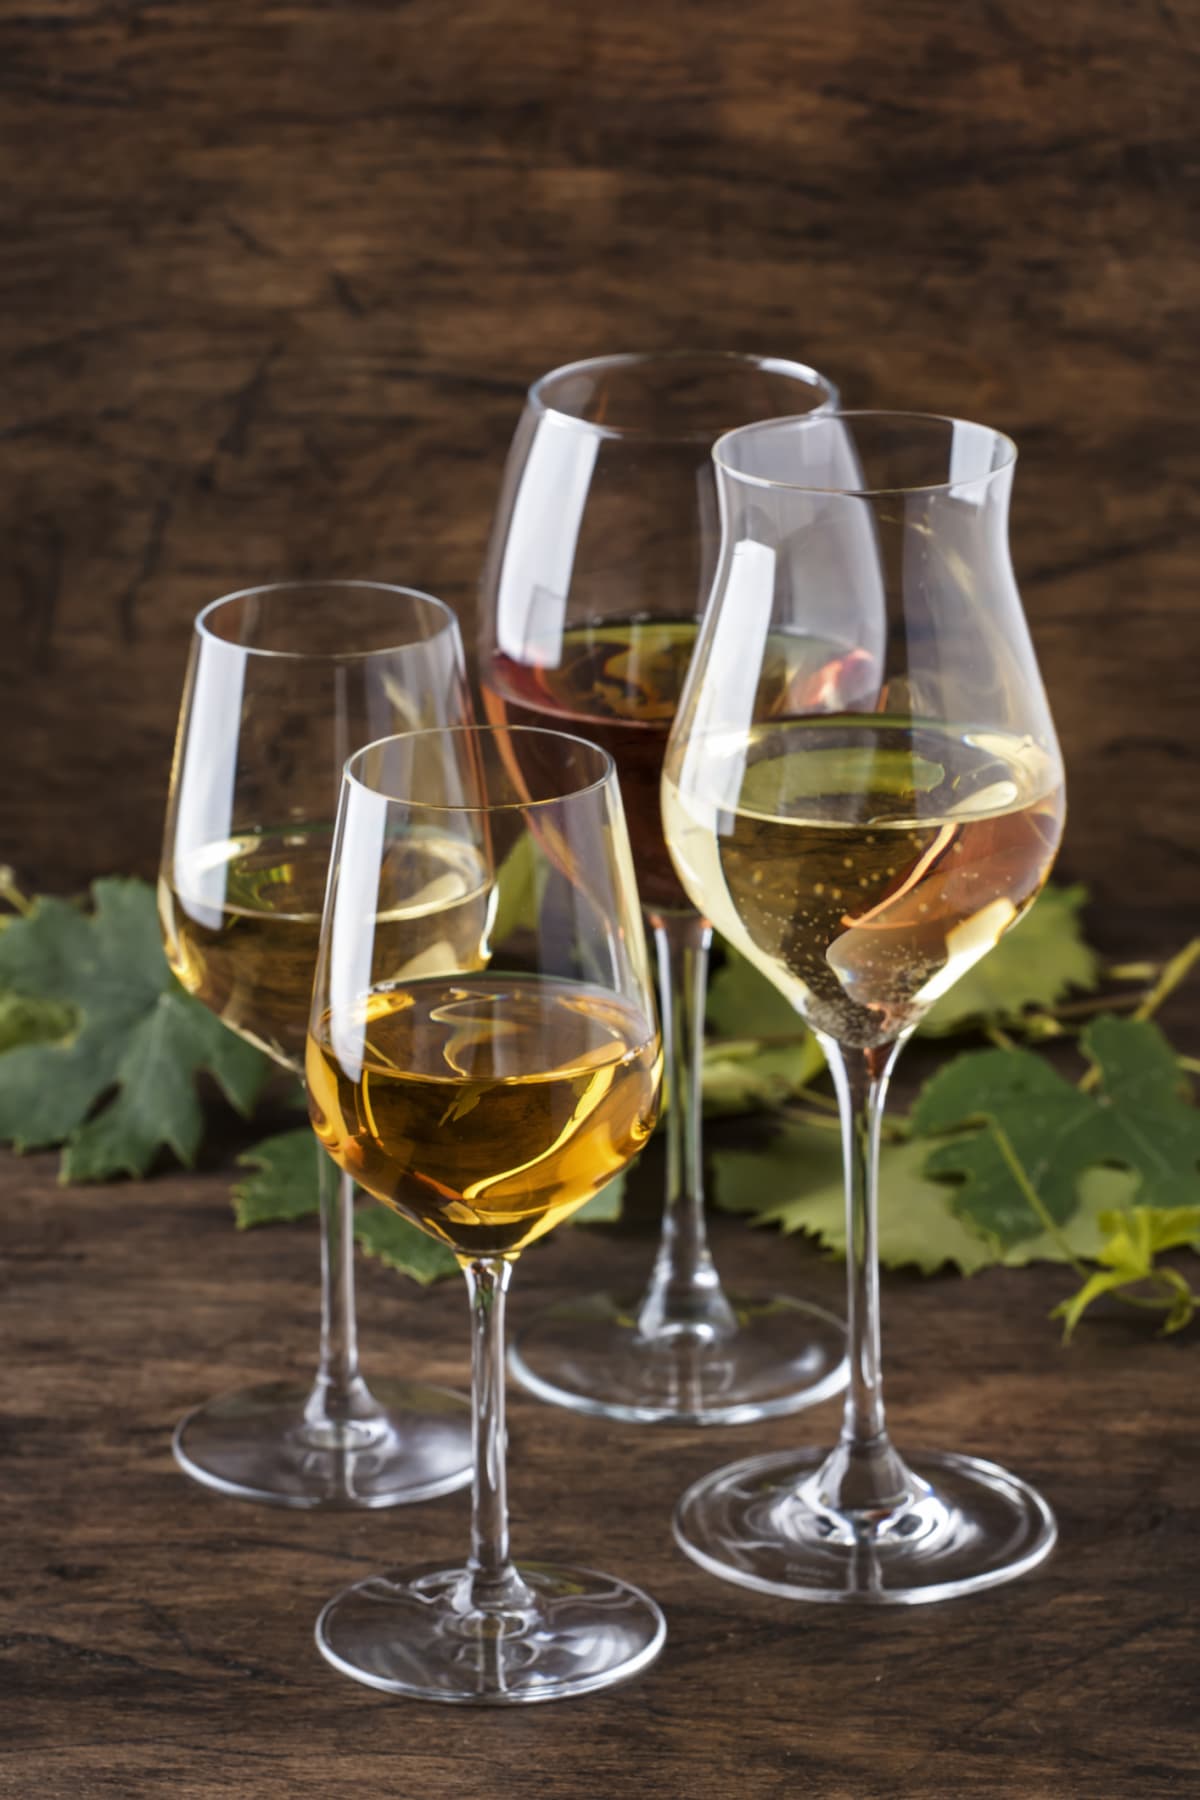 Four glasses of white wine on a wooden table